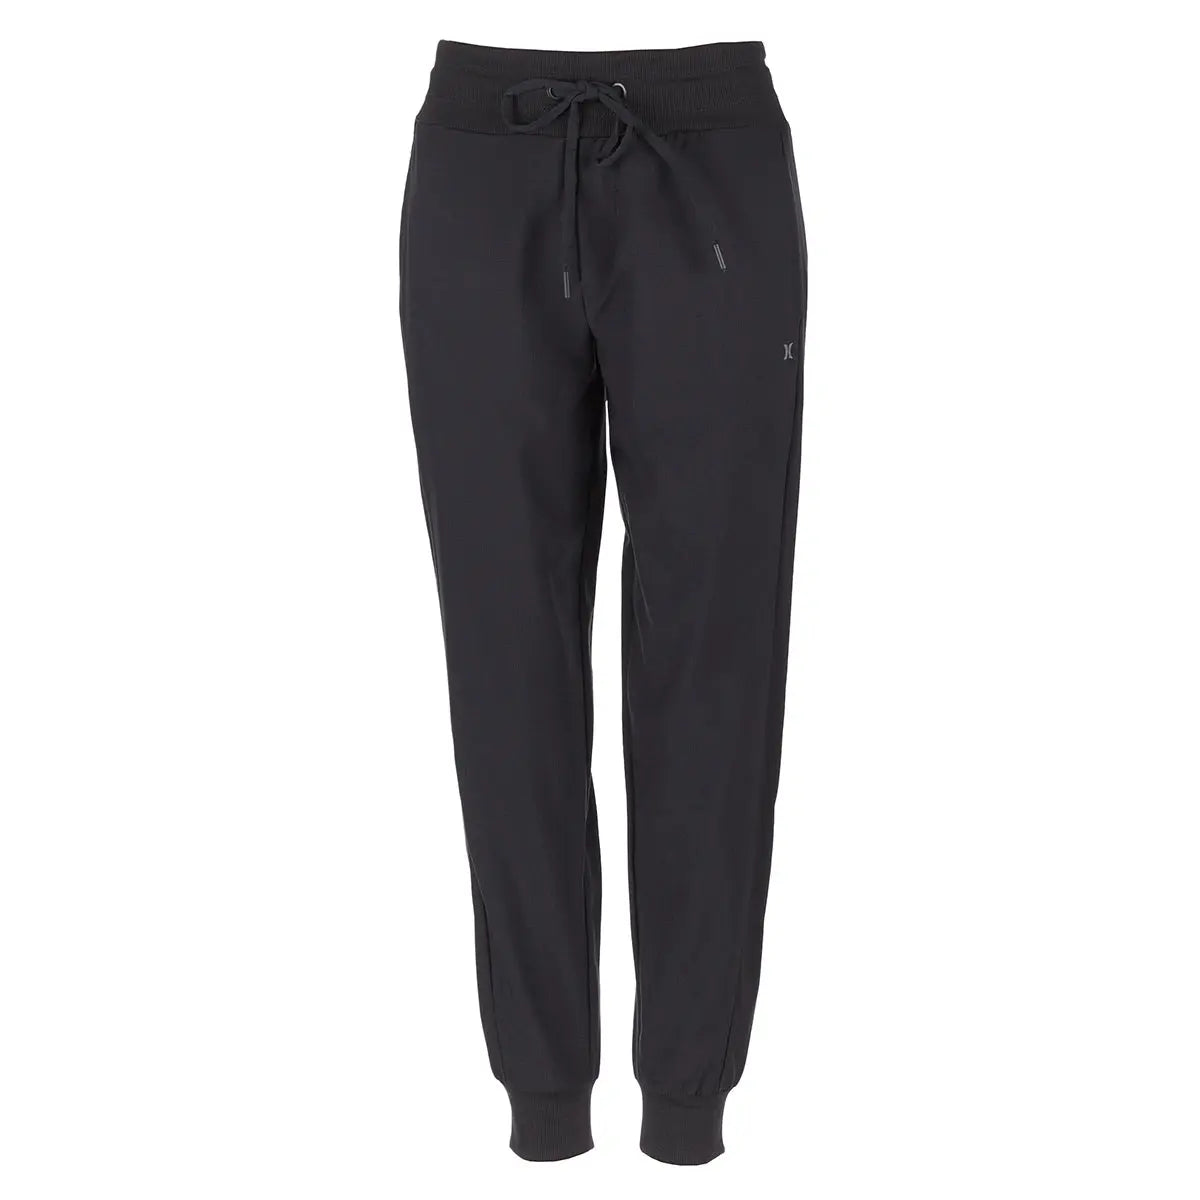 Hurley Women's City Stretch Jogger